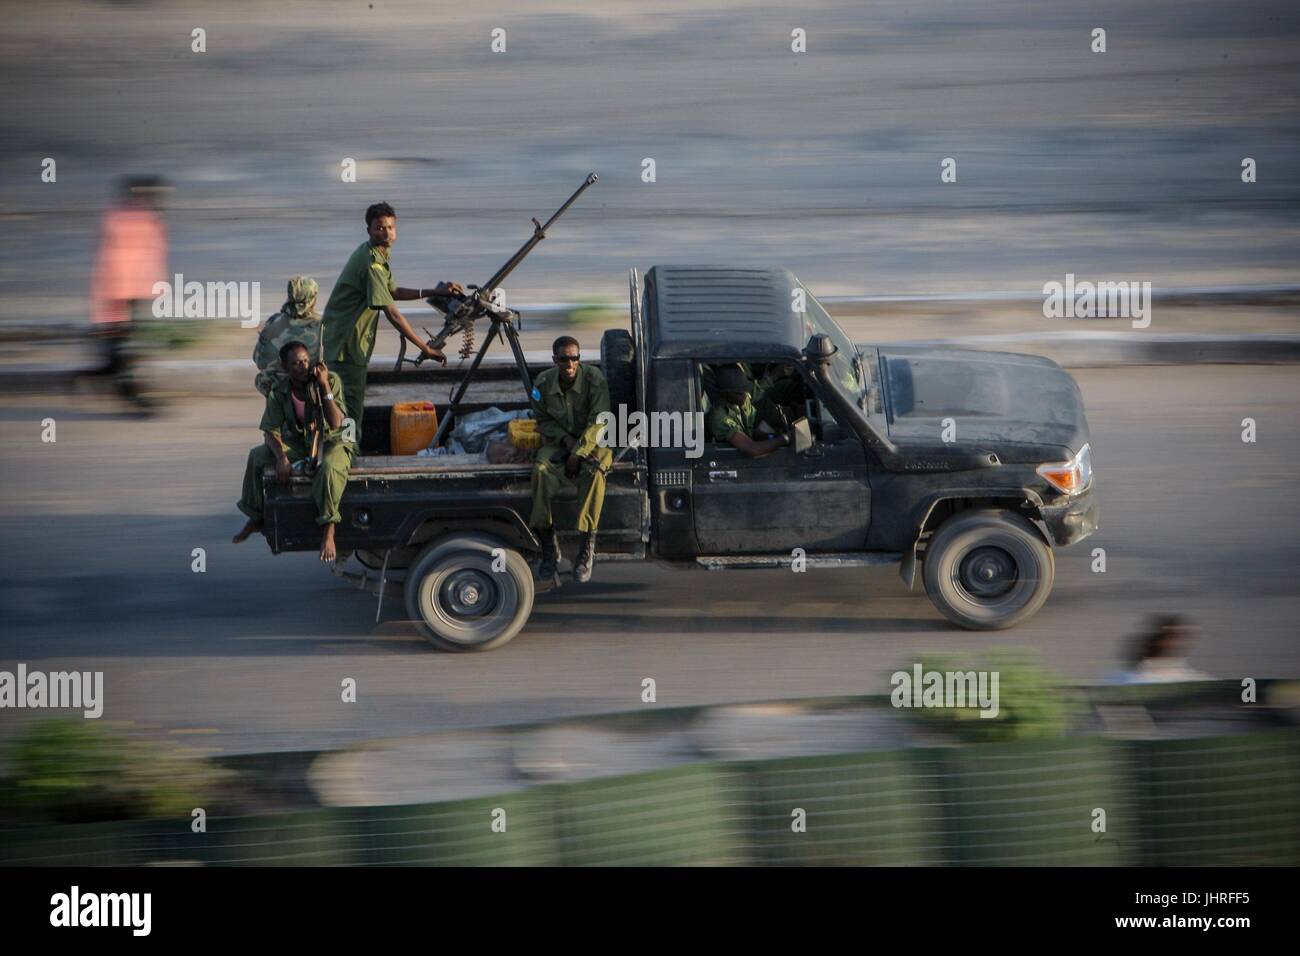 Somali National Army soldiers man a mounted machine gun as their vehicle races along a road near the parliament building August 6, 2012 in Mogadishu, Somalia.    (photo by Stuart Price  via Planetpix) Stock Photo